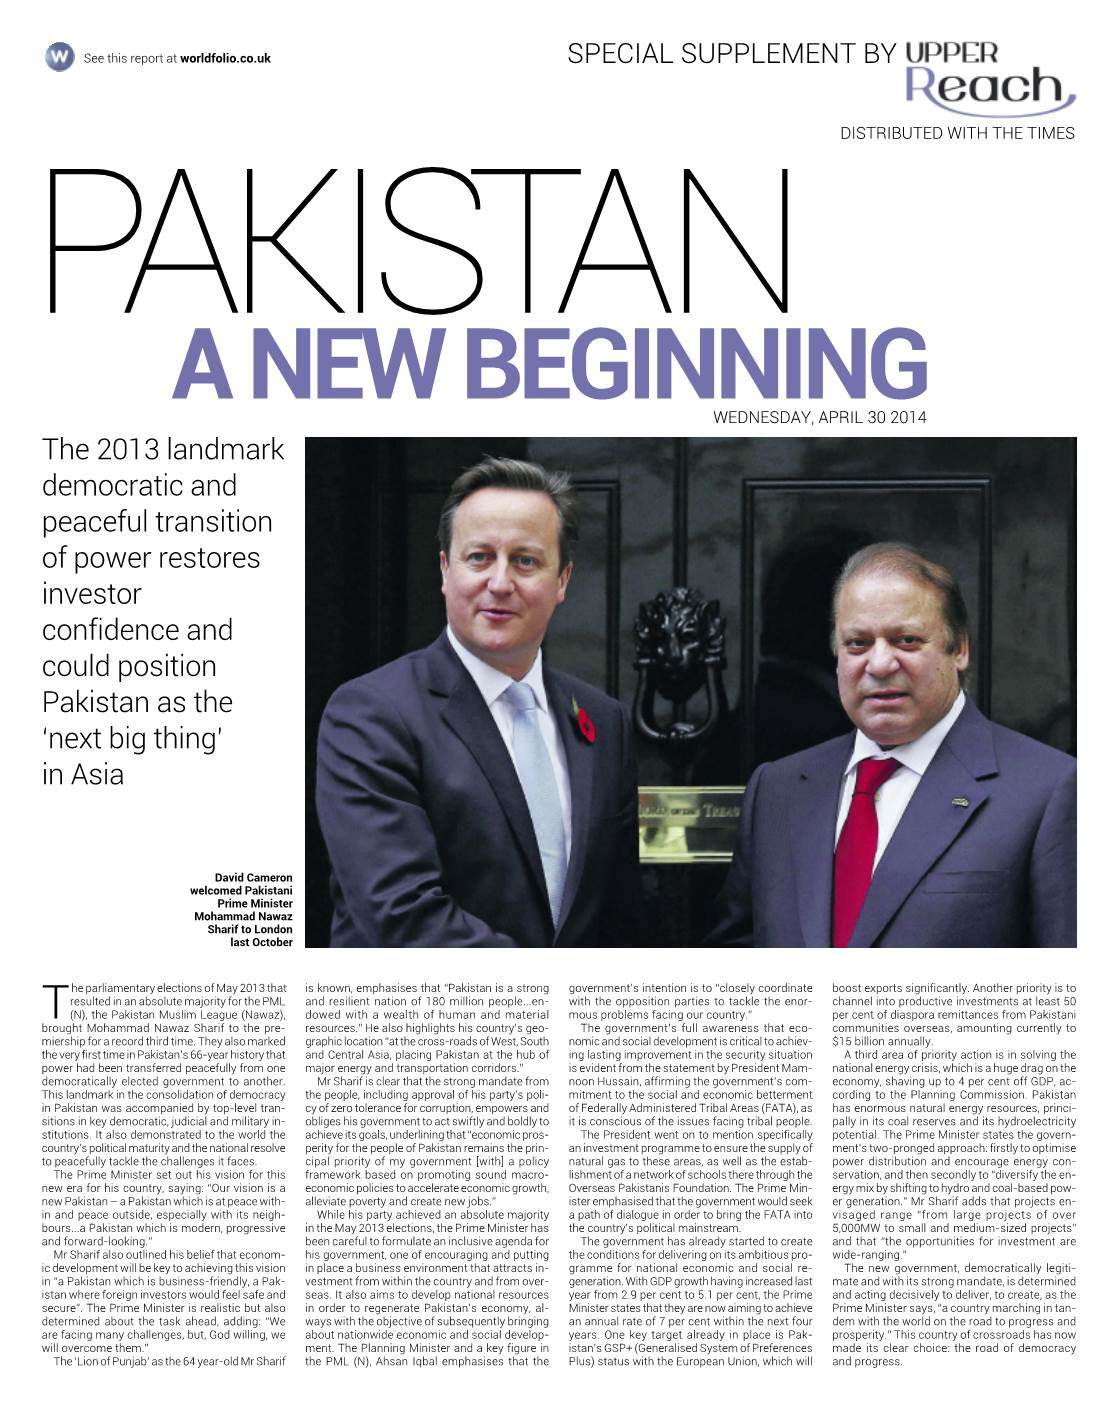 A New Beginning for Pakistan This Is an Independent Publication by Upper Reach 02